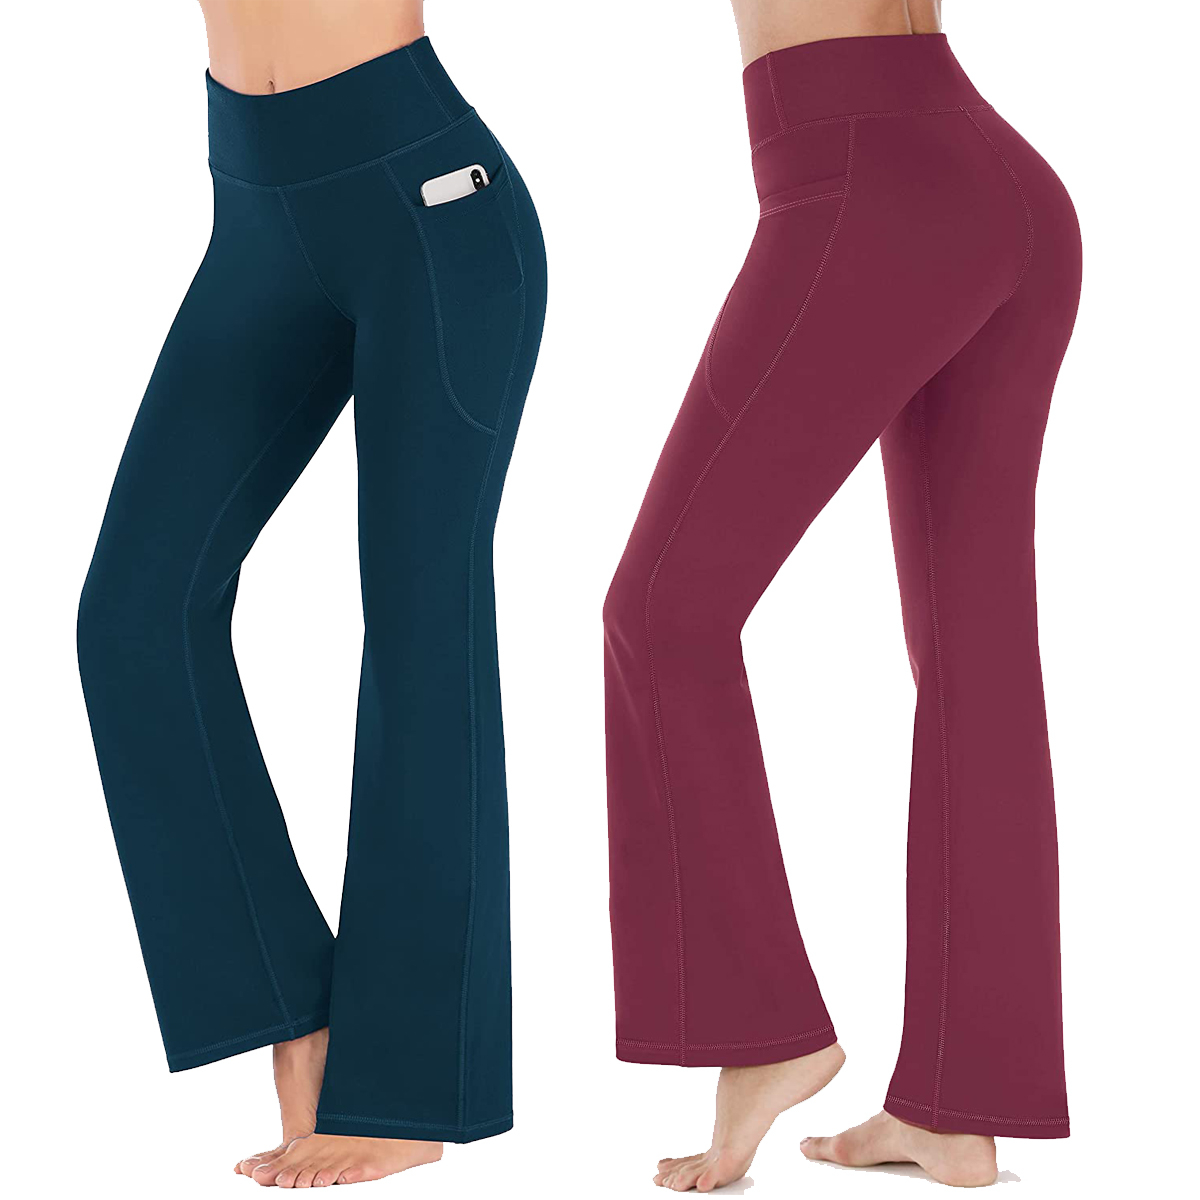 These $29 Yoga Pants With Pockets Have 13,000+ 5-Star  Reviews